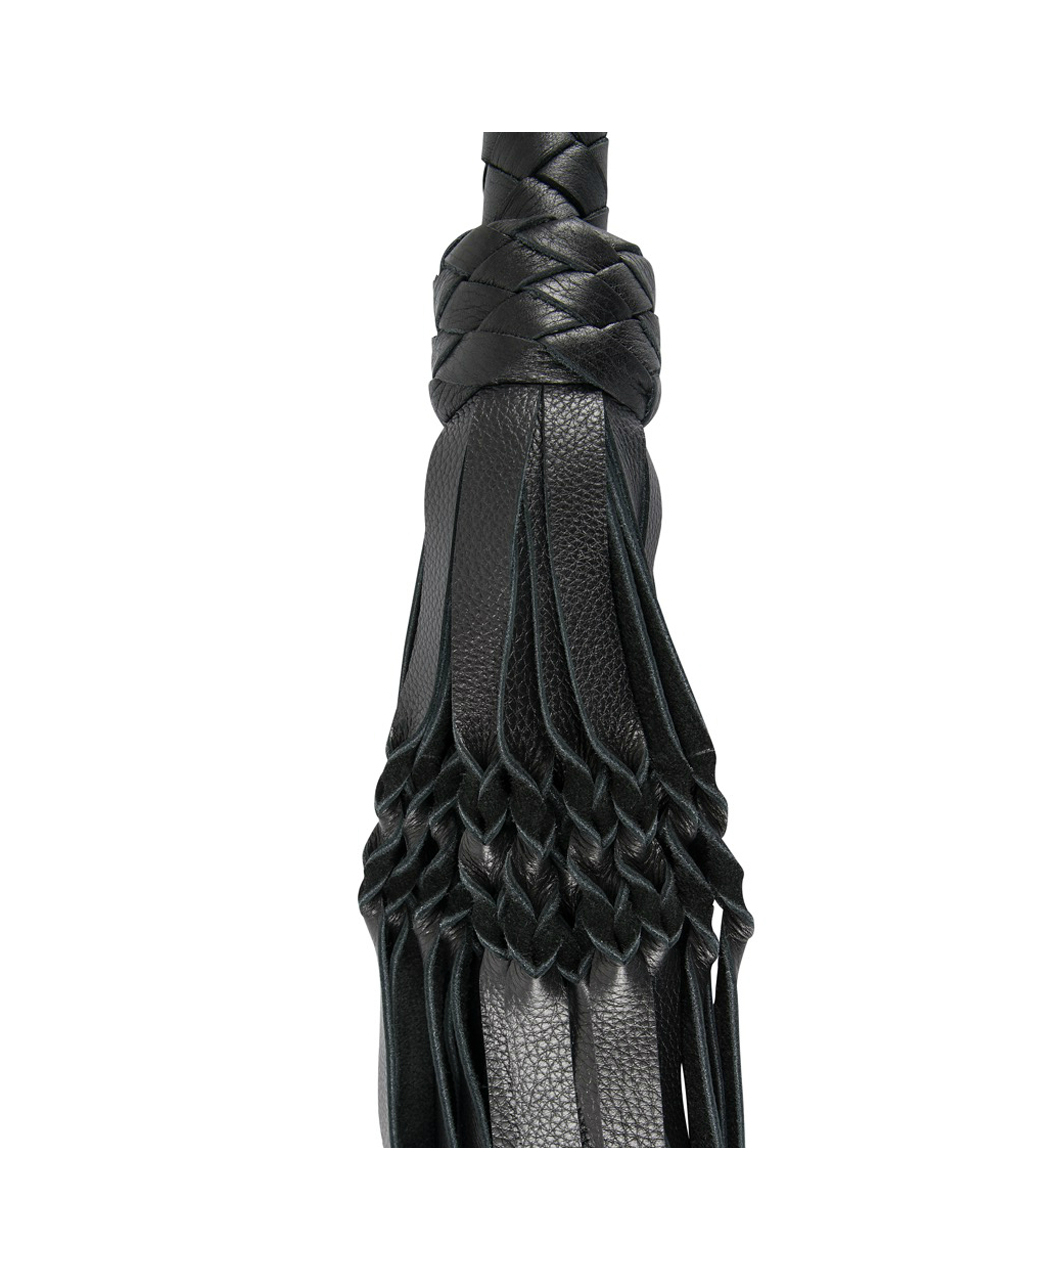 Zado leather flogger with braided parts